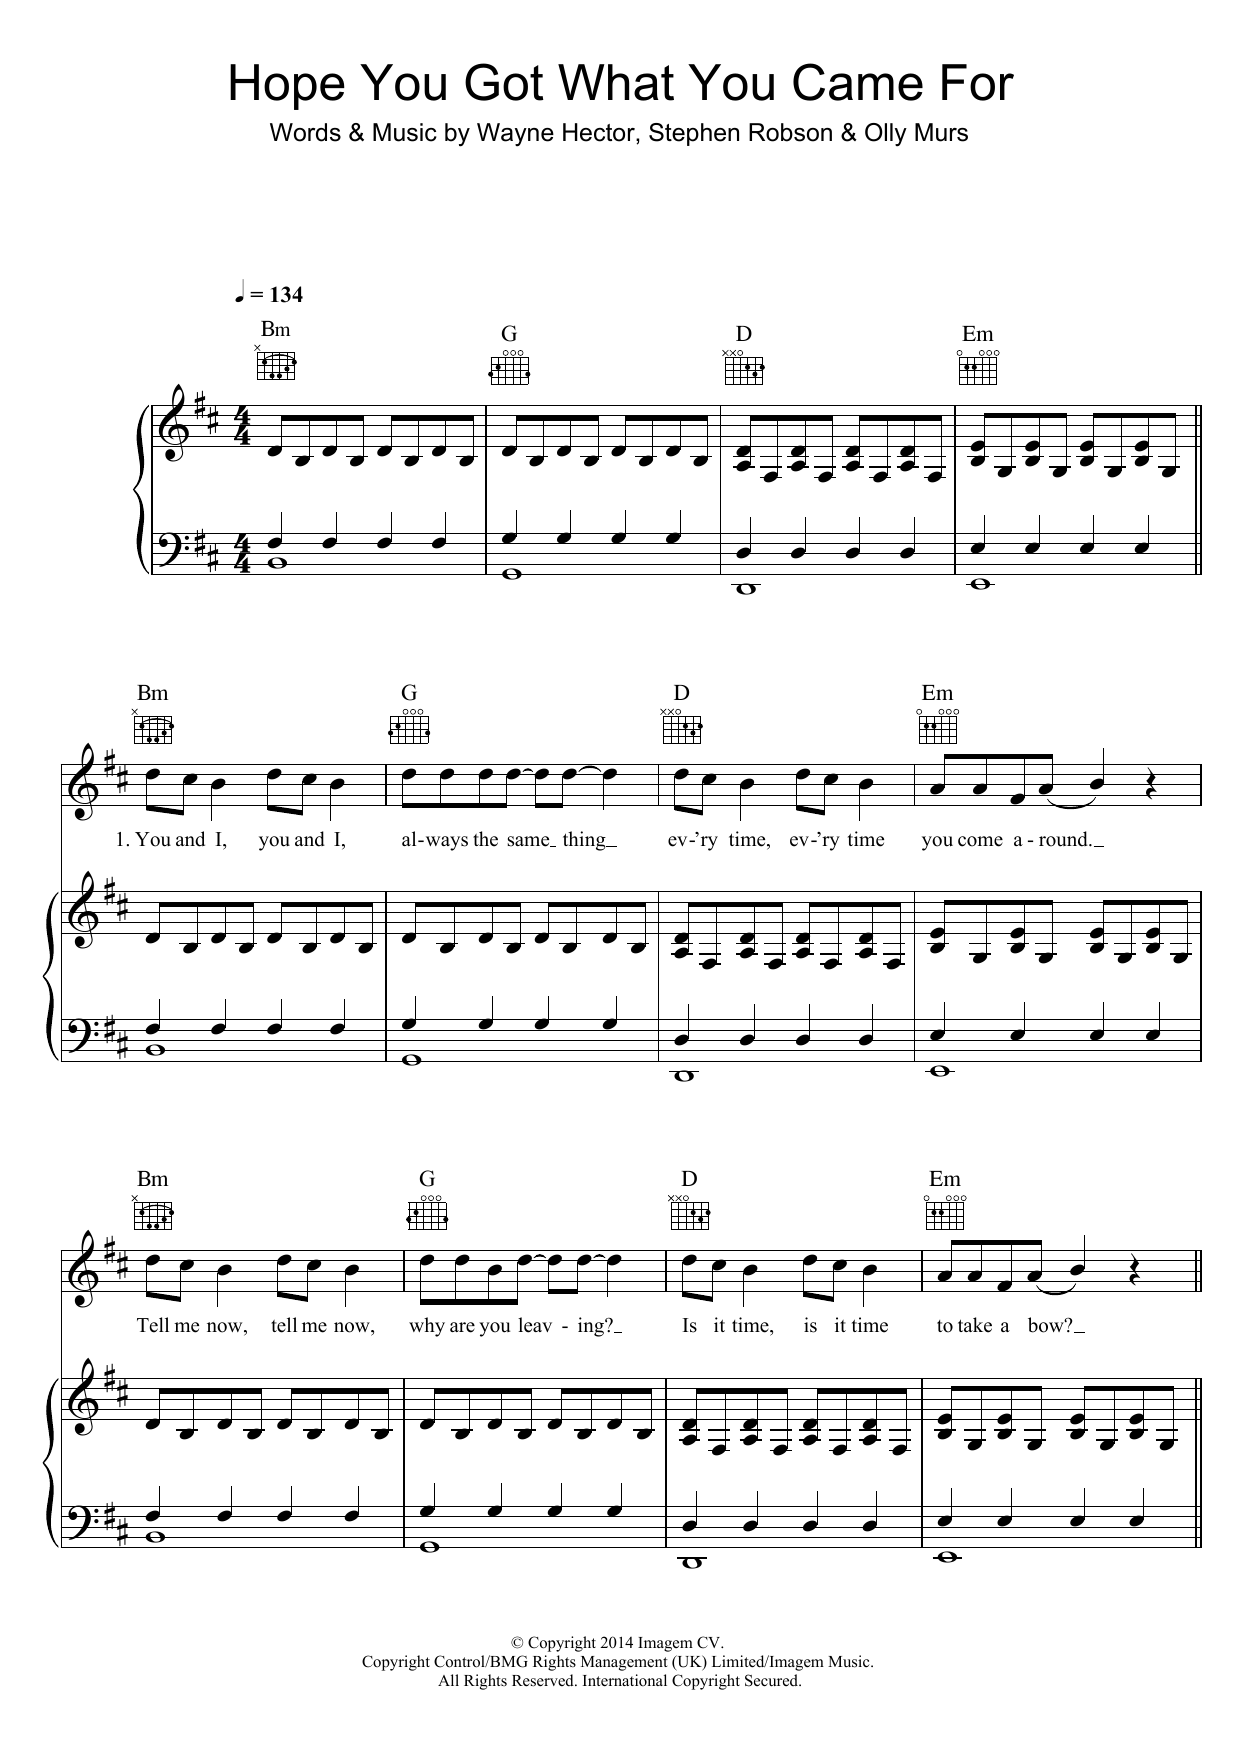 Download Olly Murs Hope You Got What You Came For Sheet Music